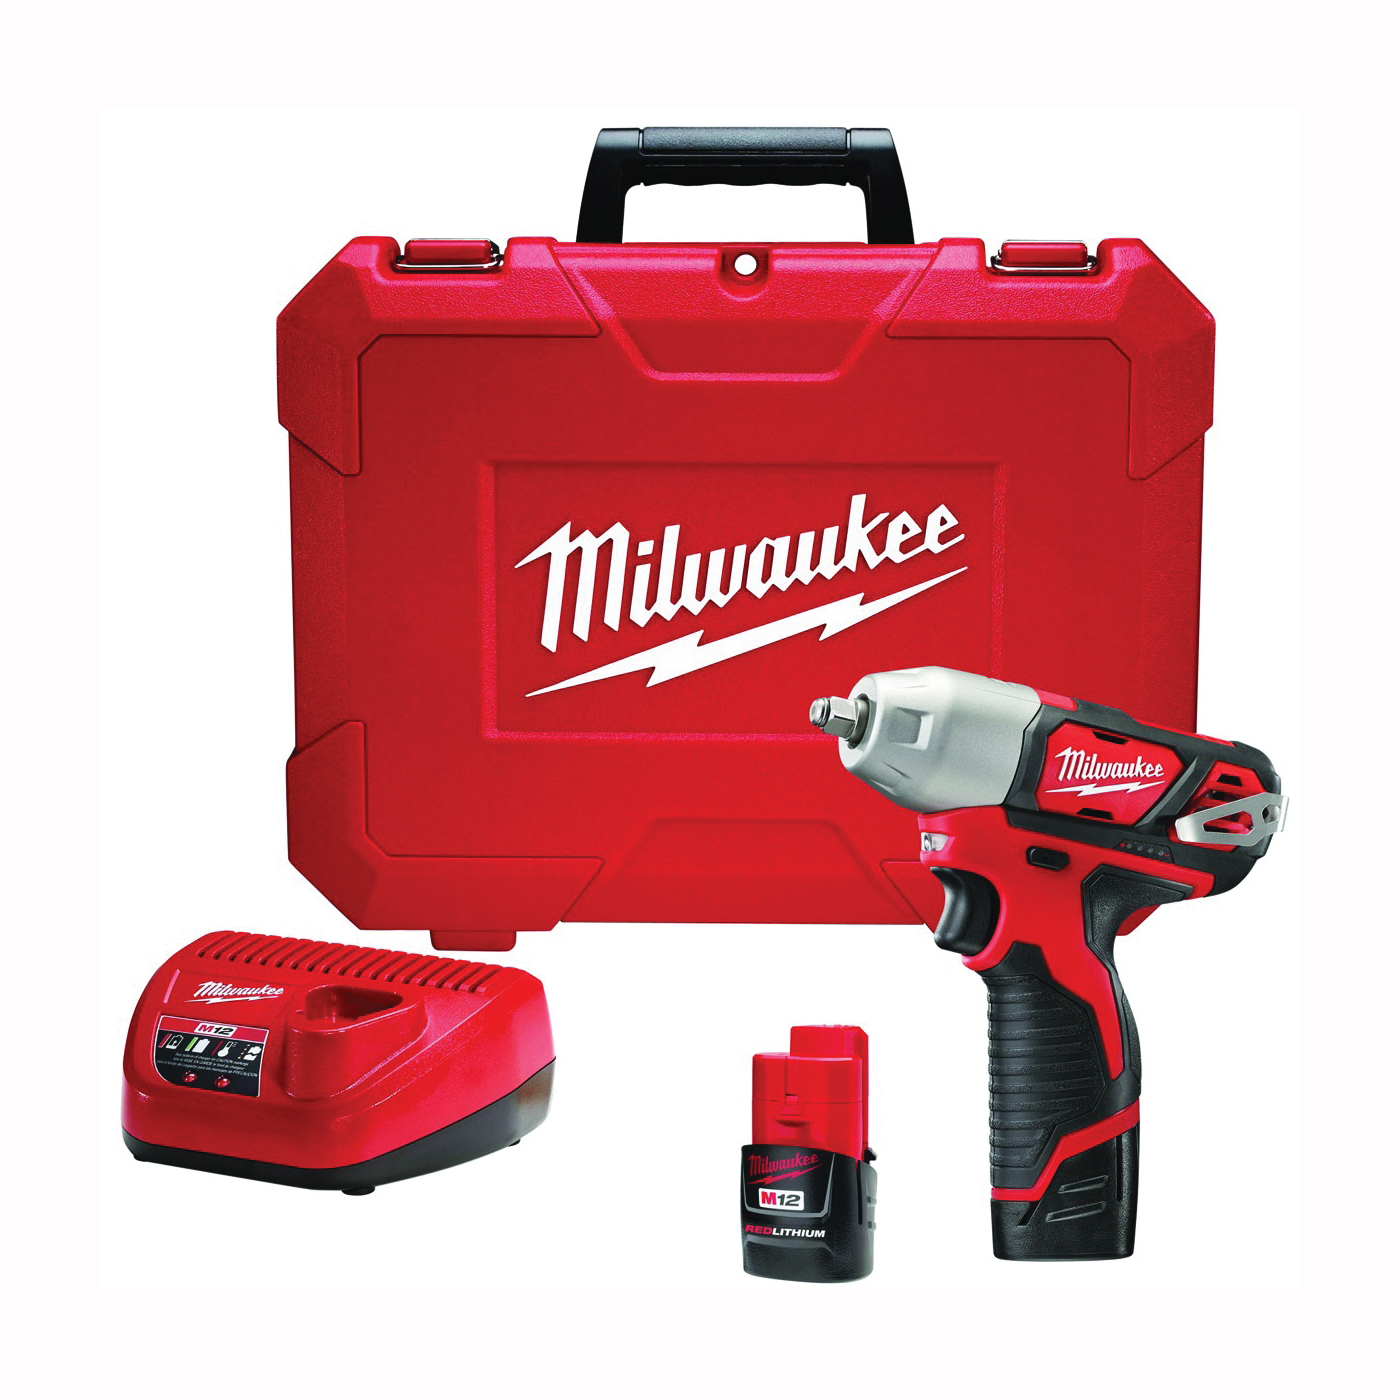 2463-22 Impact Wrench Kit, Battery Included, 12 V, 1.5 Ah, 3/8 in Drive, Hex, Straight Drive